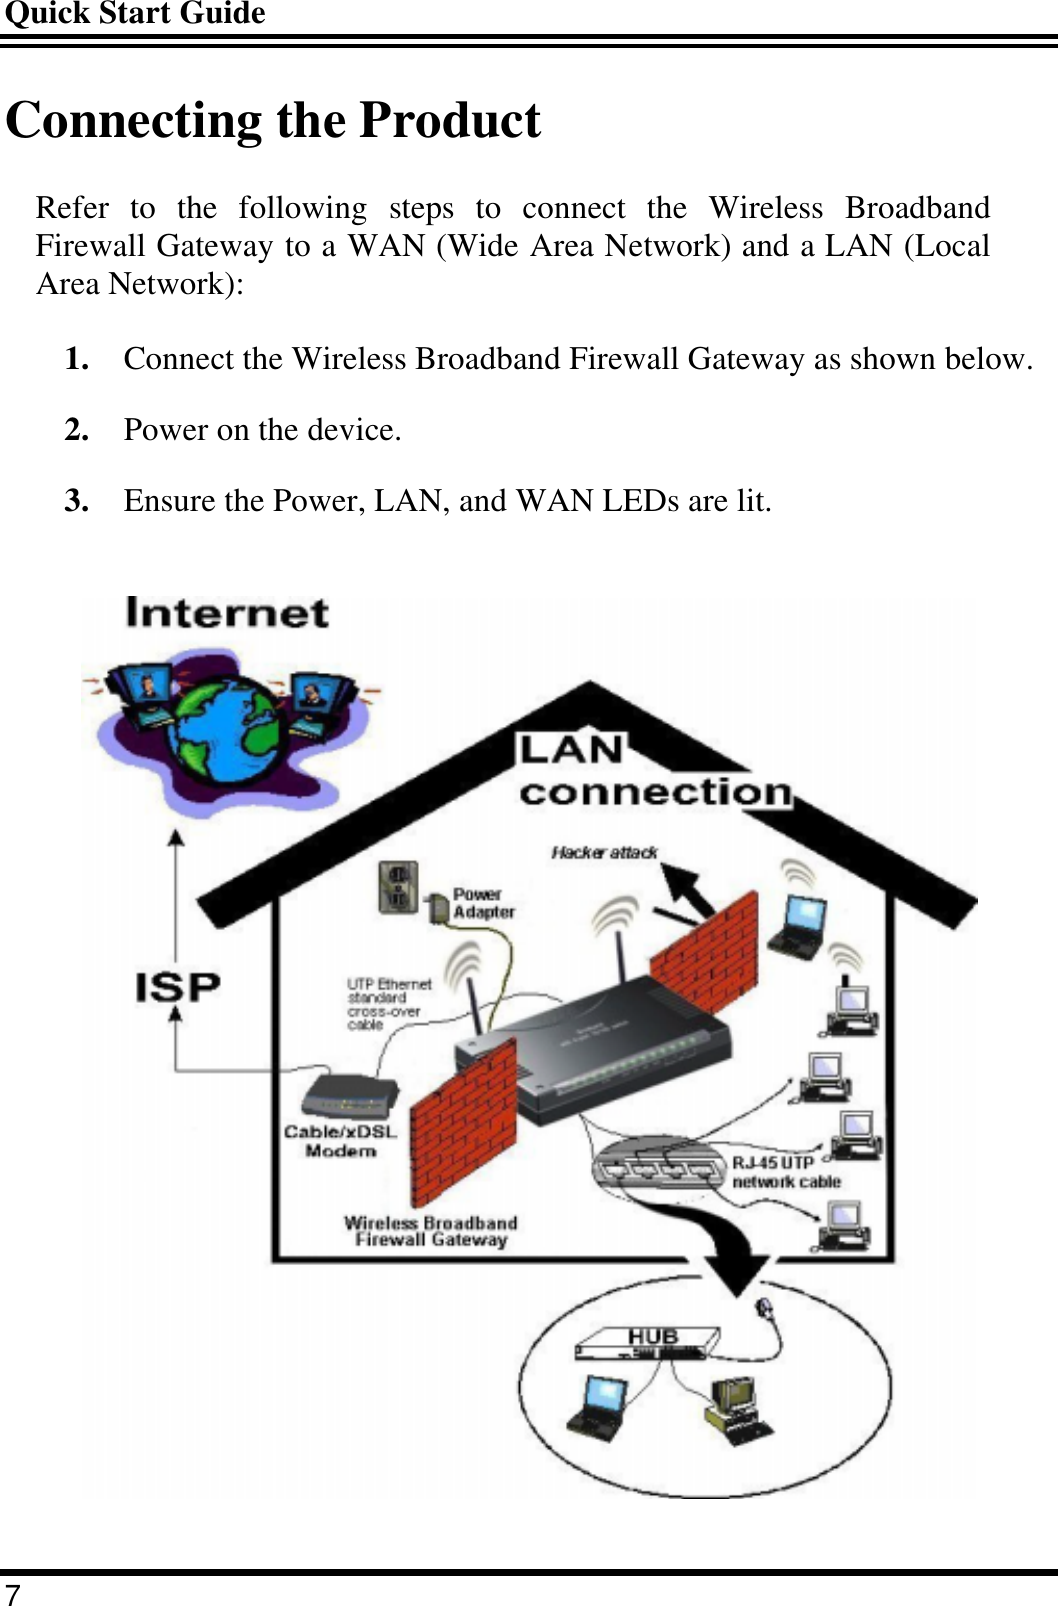 Quick Start Guide 7 Connecting the Product Refer to the following steps to connect the Wireless Broadband Firewall Gateway to a WAN (Wide Area Network) and a LAN (Local Area Network): 1.  Connect the Wireless Broadband Firewall Gateway as shown below. 2.  Power on the device. 3.  Ensure the Power, LAN, and WAN LEDs are lit.  